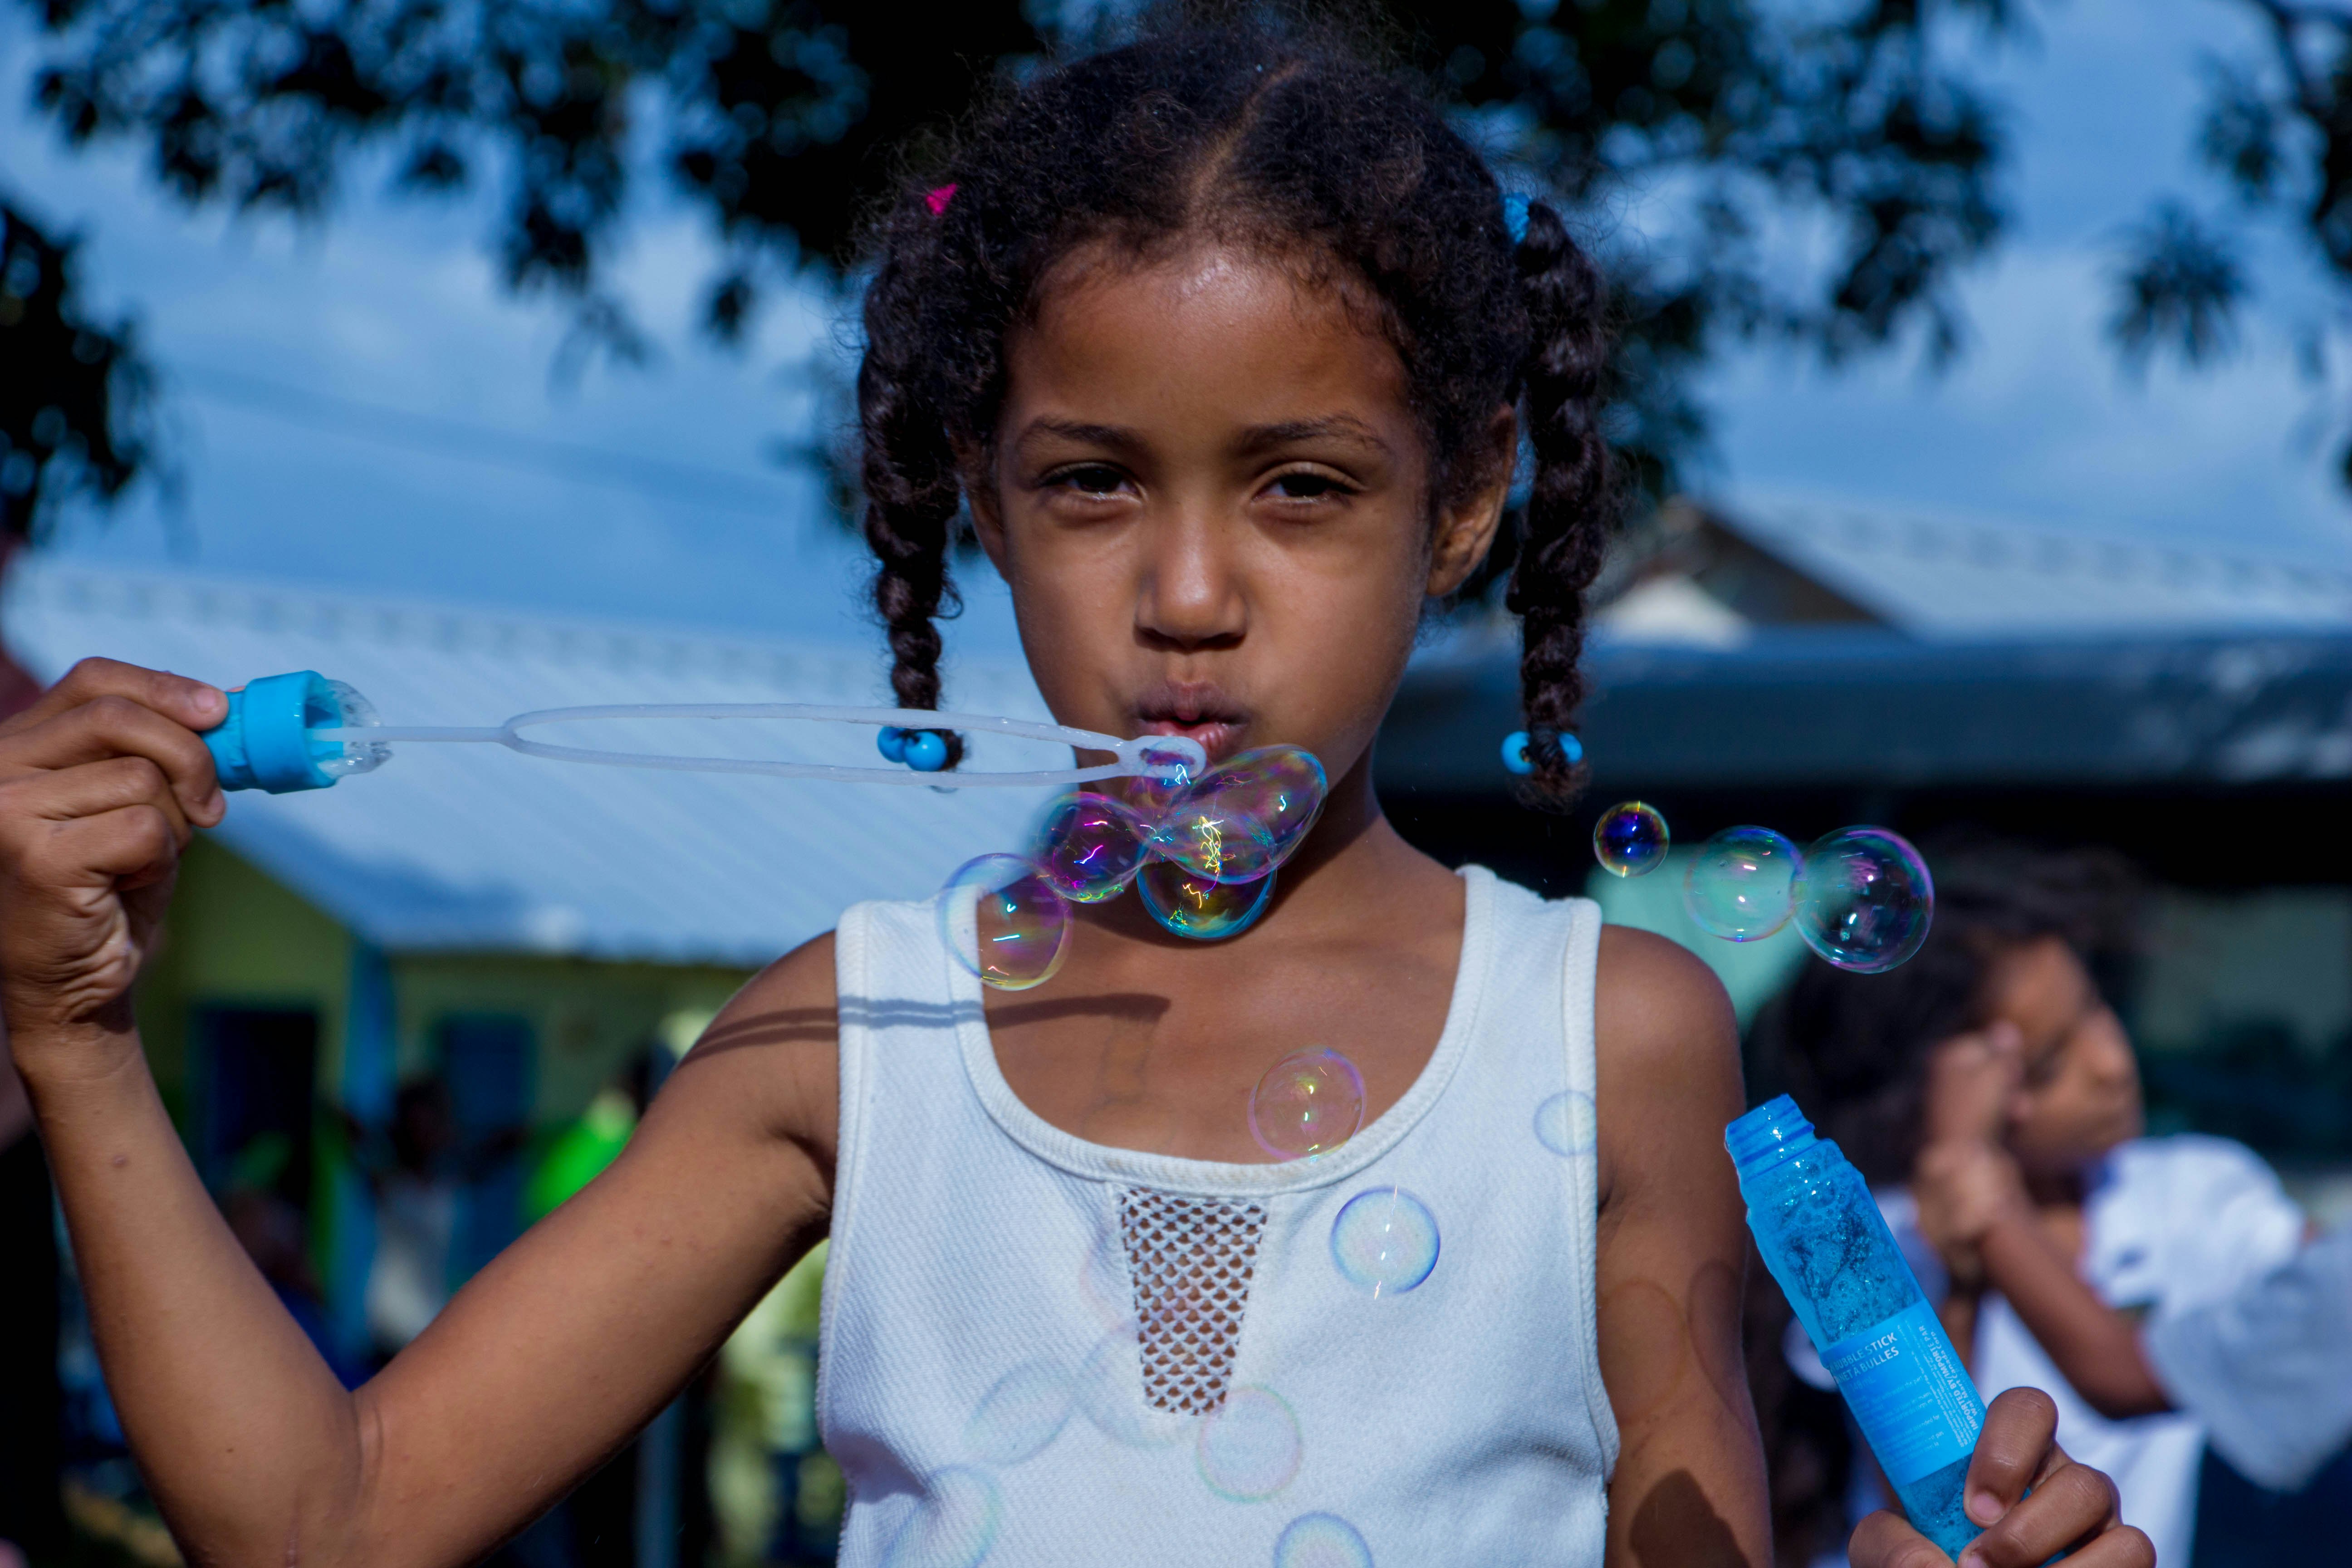 girl in white sleeveless top blowing bubbles